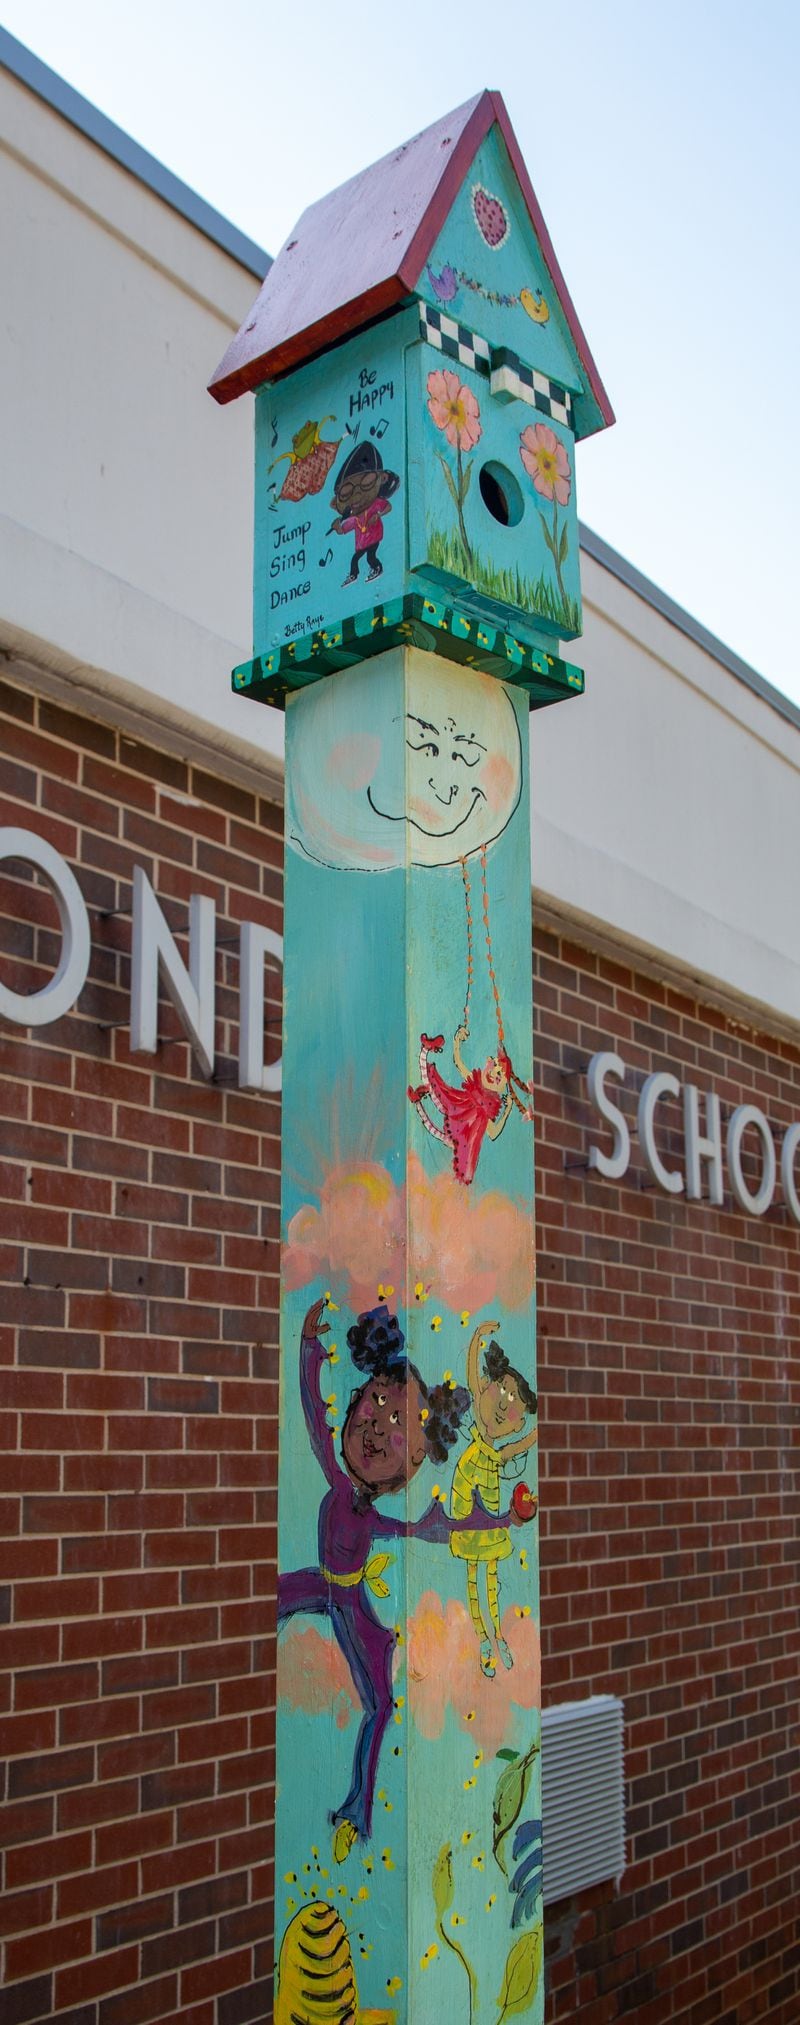 The new garden area in front of Avondale Elementary School features hand painted totem poles and a lending library. The Avondale Estates Garden Club and the Avon Garden Club worked together on the project.
PHIL SKINNER FOR THE ATLANTA JOURNAL-CONSTITUTION.